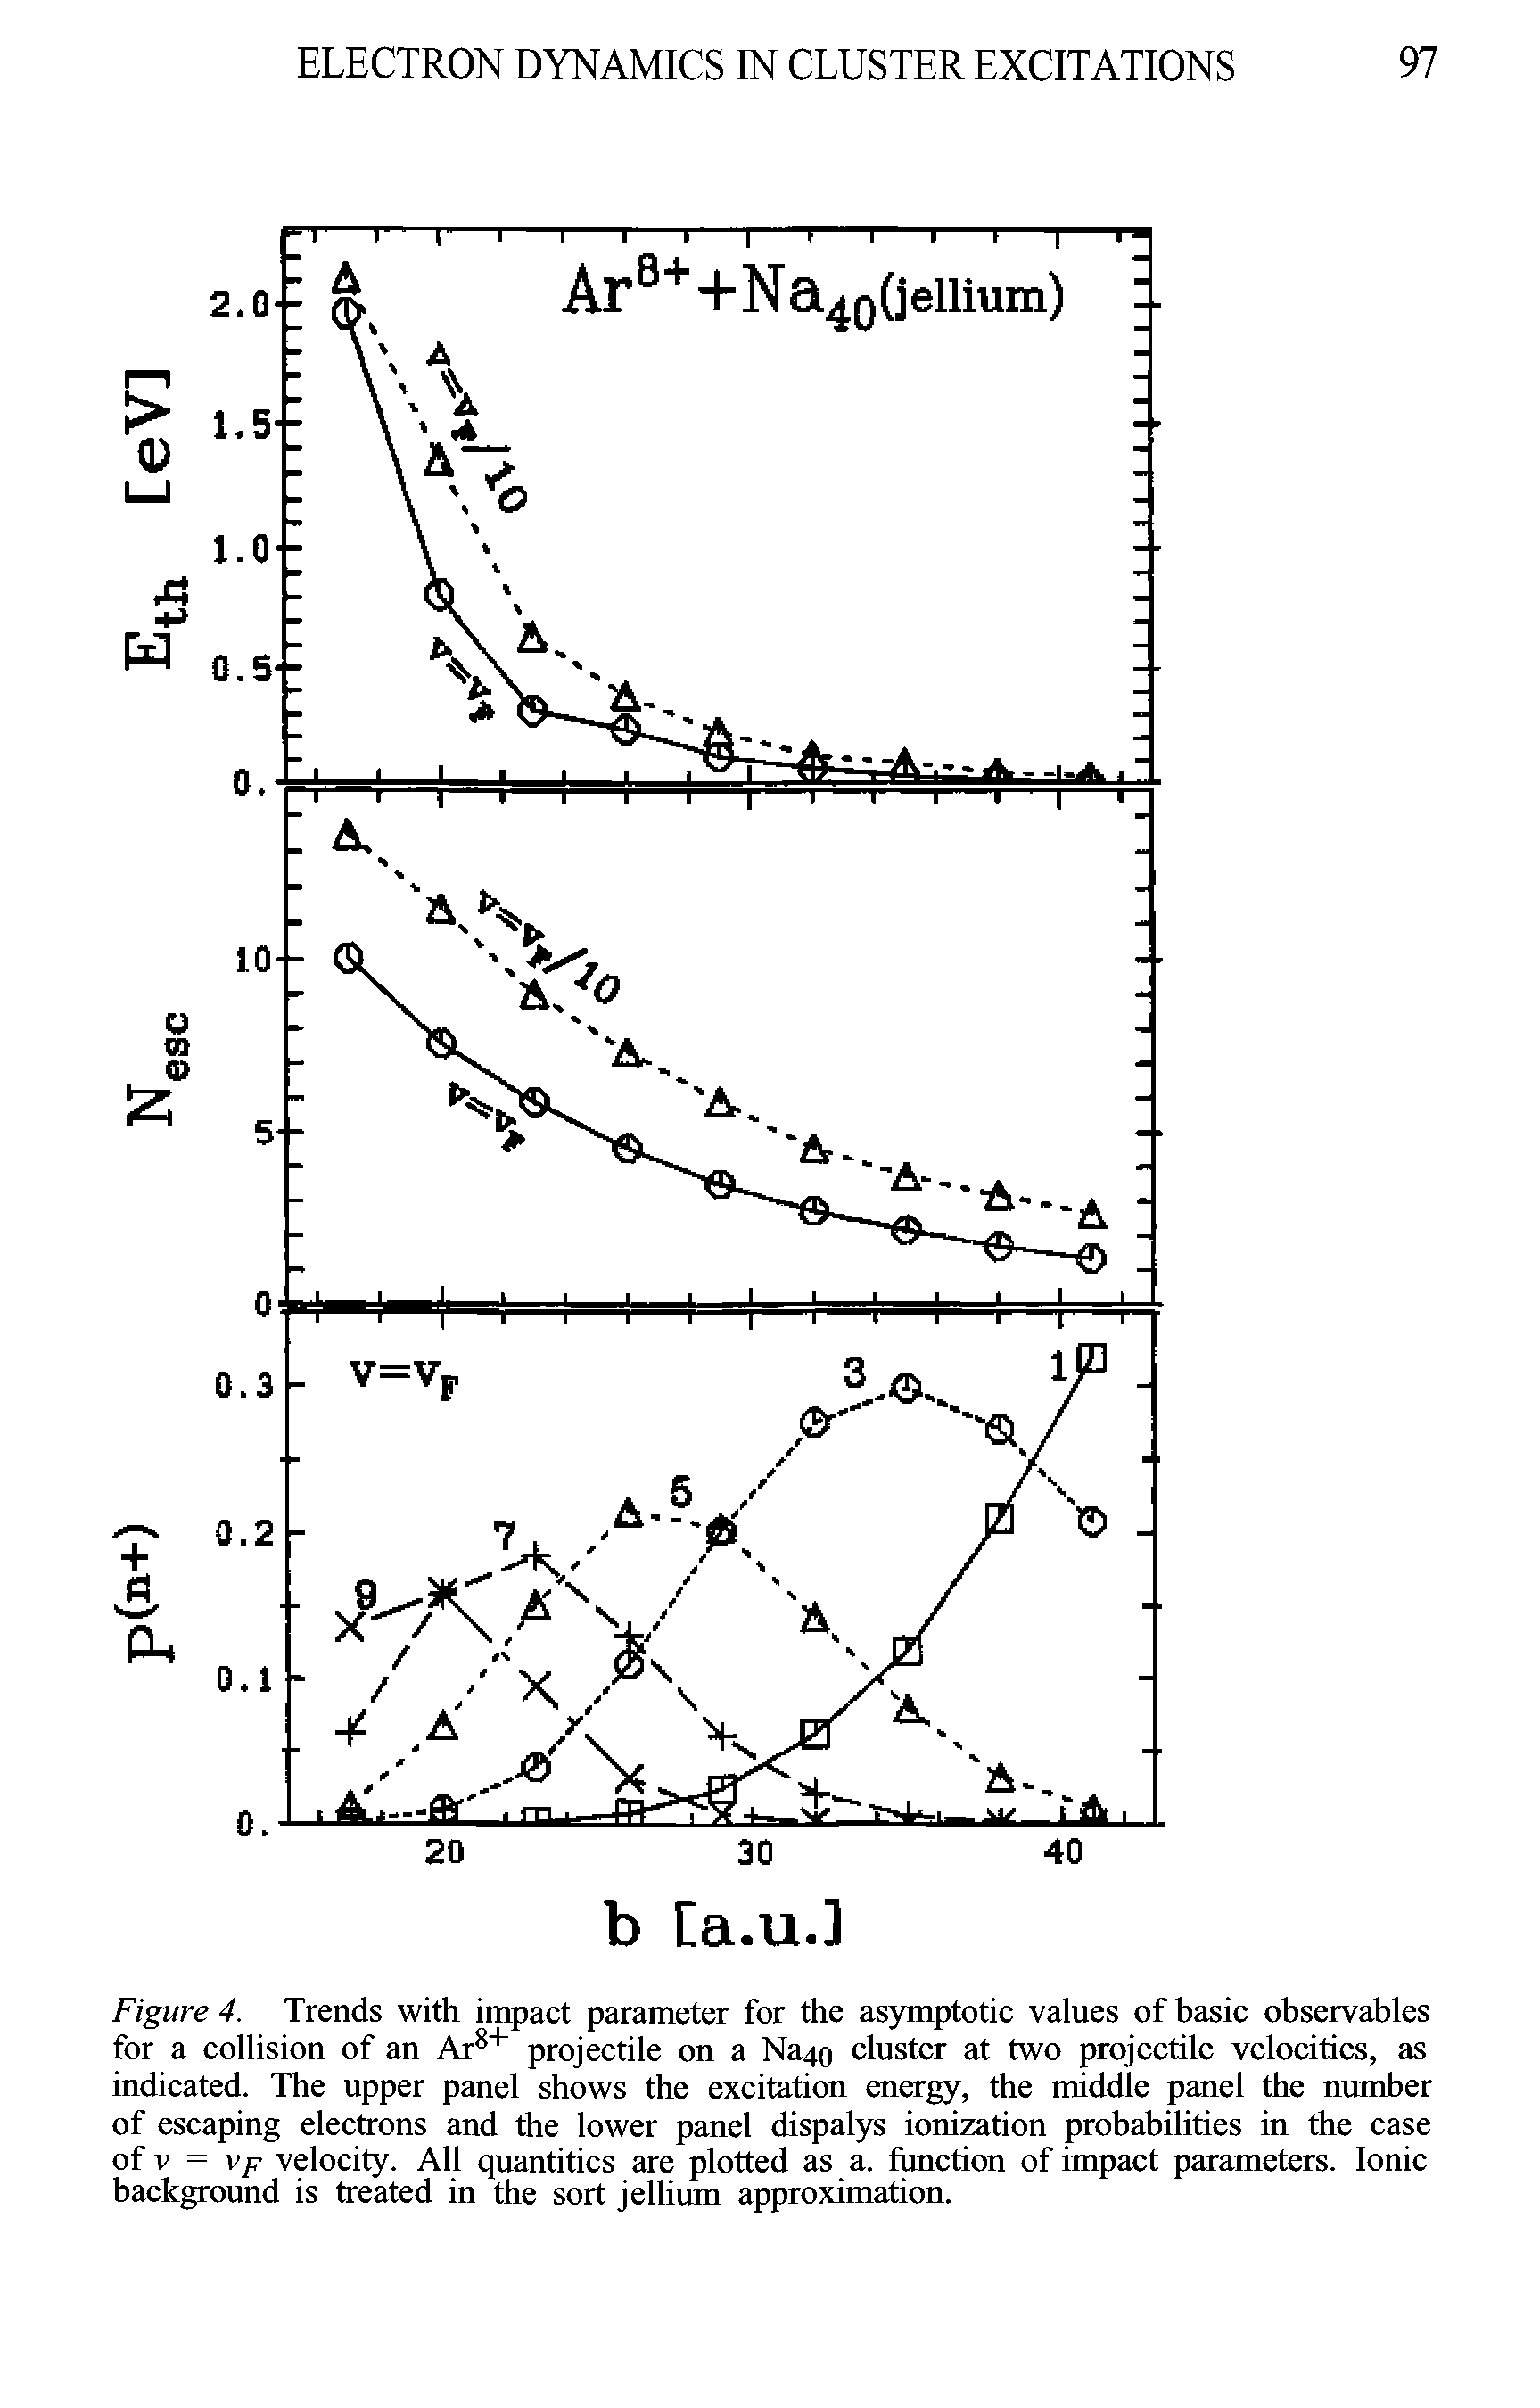 Figure 4. Trends with impact parameter for the asymptotic values of basic observables for a collision of an Ar8+ projectile on a Nazto cluster at two projectile velocities, as indicated. The upper panel shows the excitation energy, the middle panel the number of escaping electrons and the lower panel dispalys ionization probabilities in the case of v = vp velocity. All quantities are plotted as a. function of impact parameters. Ionic background is treated in the sort jellium approximation.